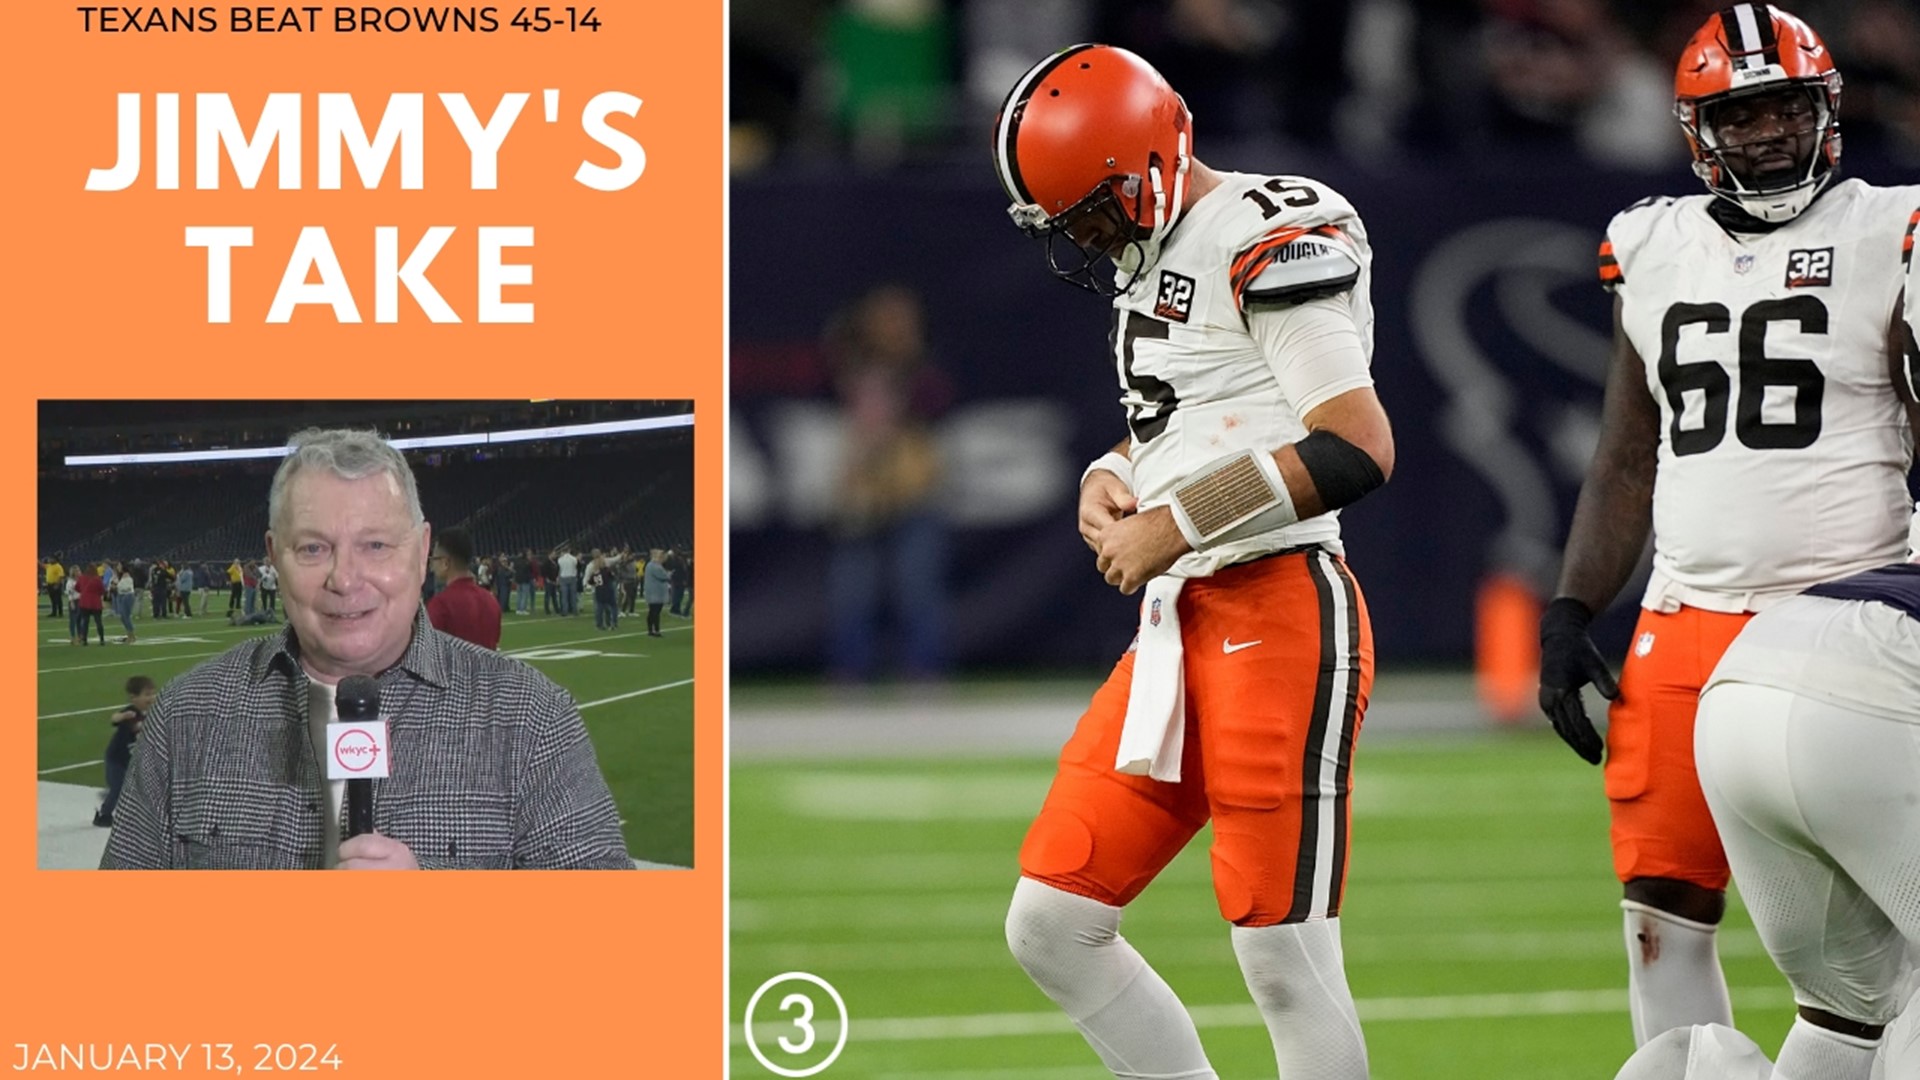 Jim Donovan breaks down the Browns embarrassing playoff loss to the Texans.